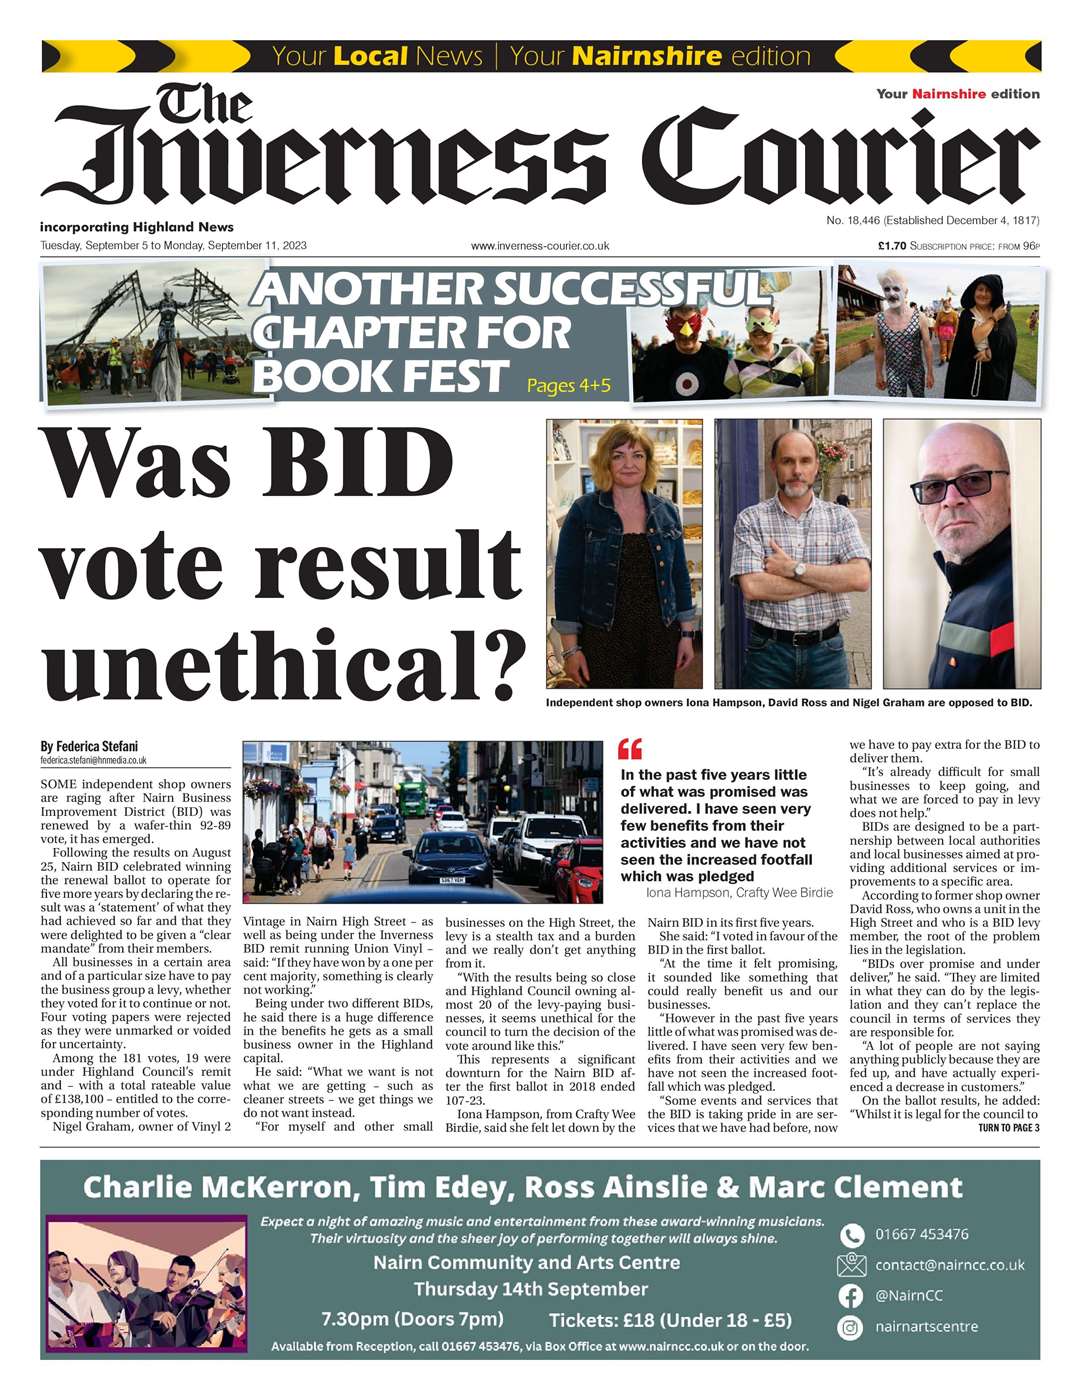 The Inverness Courier (Nairnshire edition), September 5, front page.